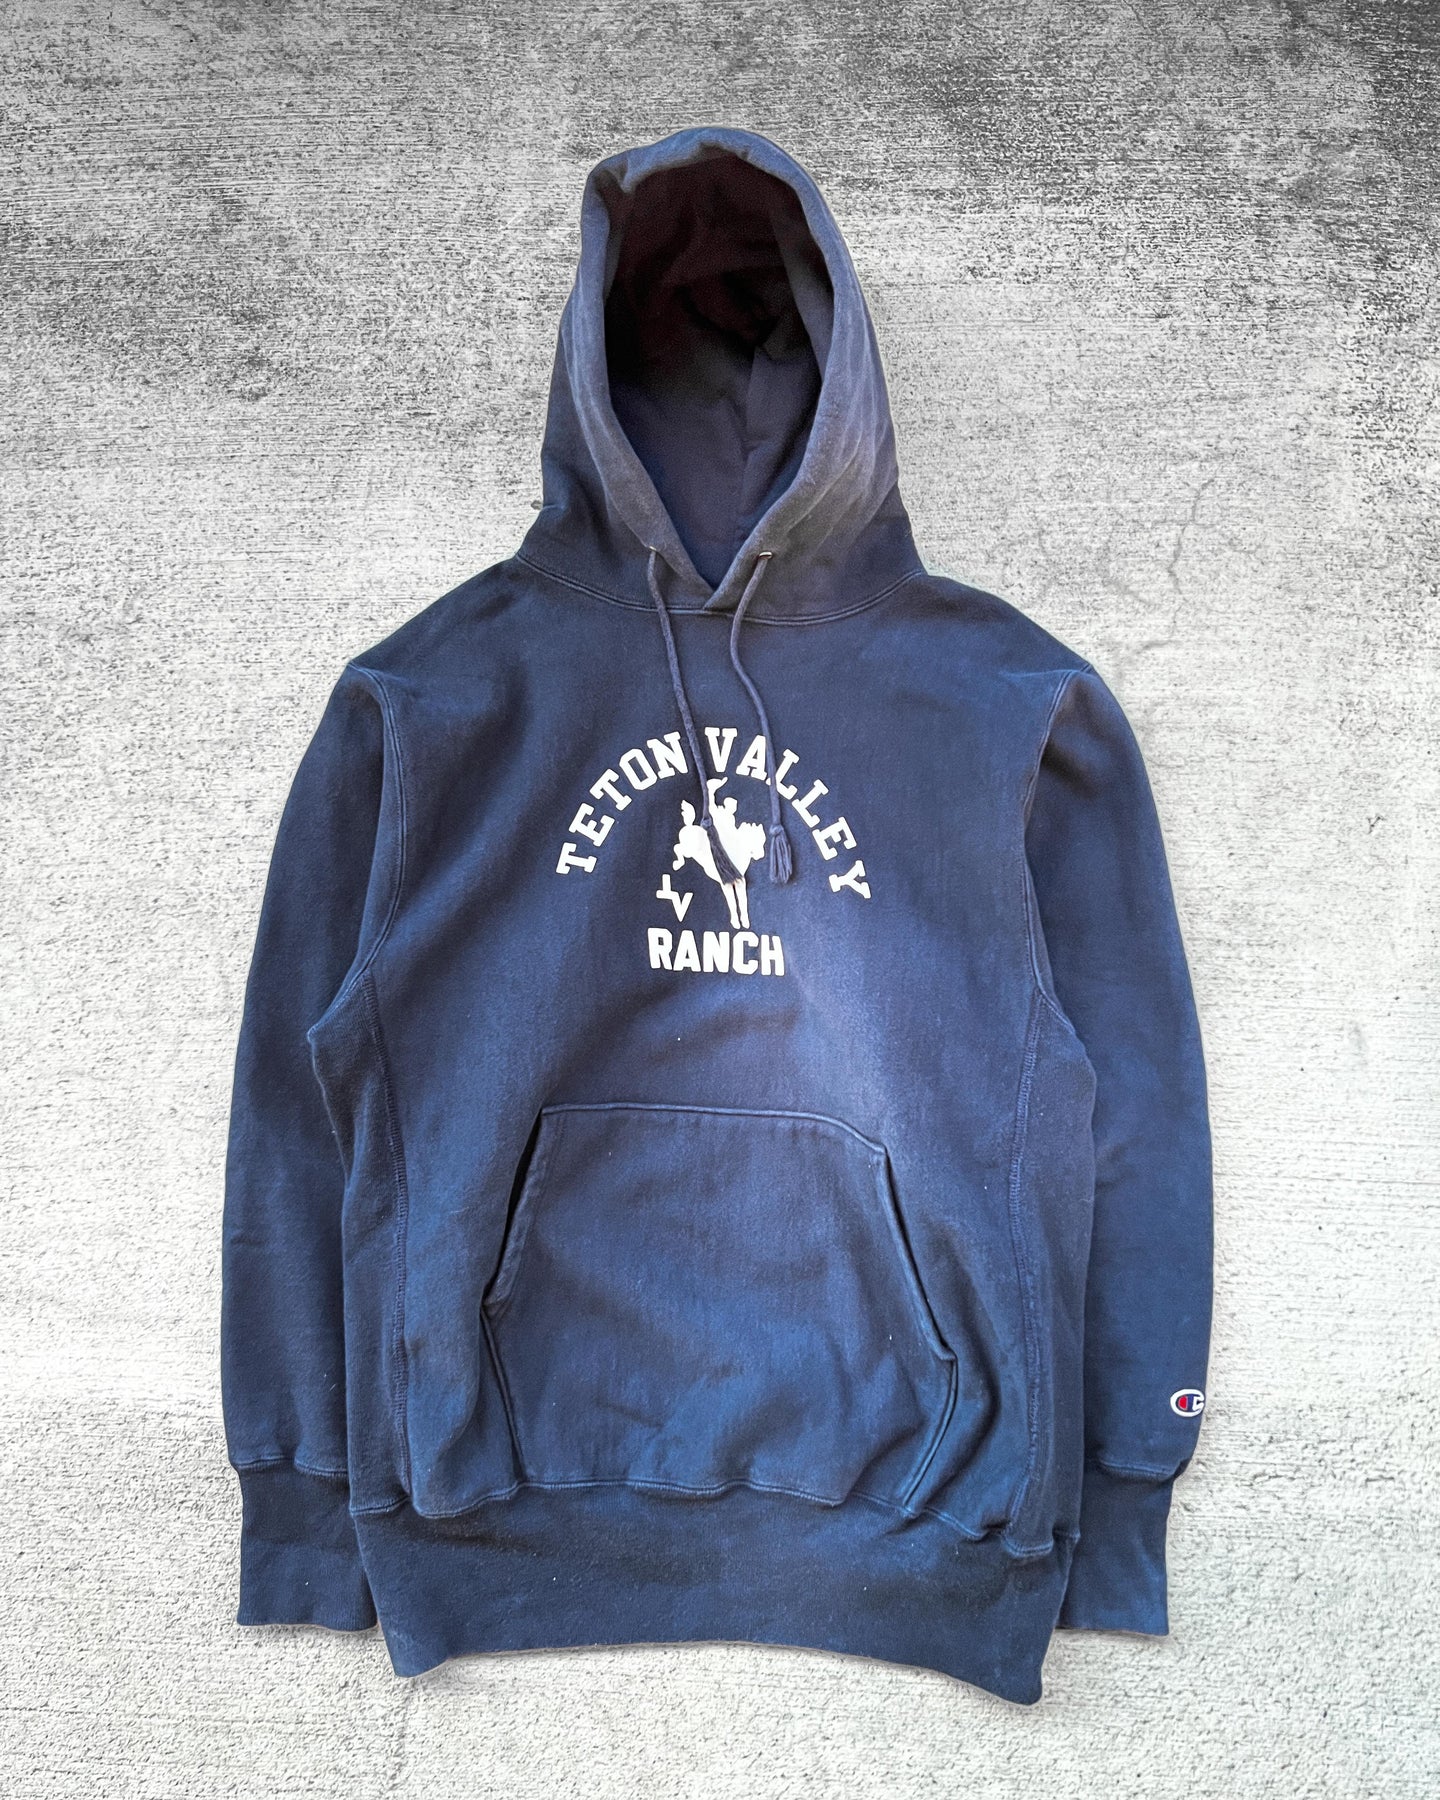 1990s Champion Reverse Weave Teton Valley Ranch Hoodie - Size X-Large